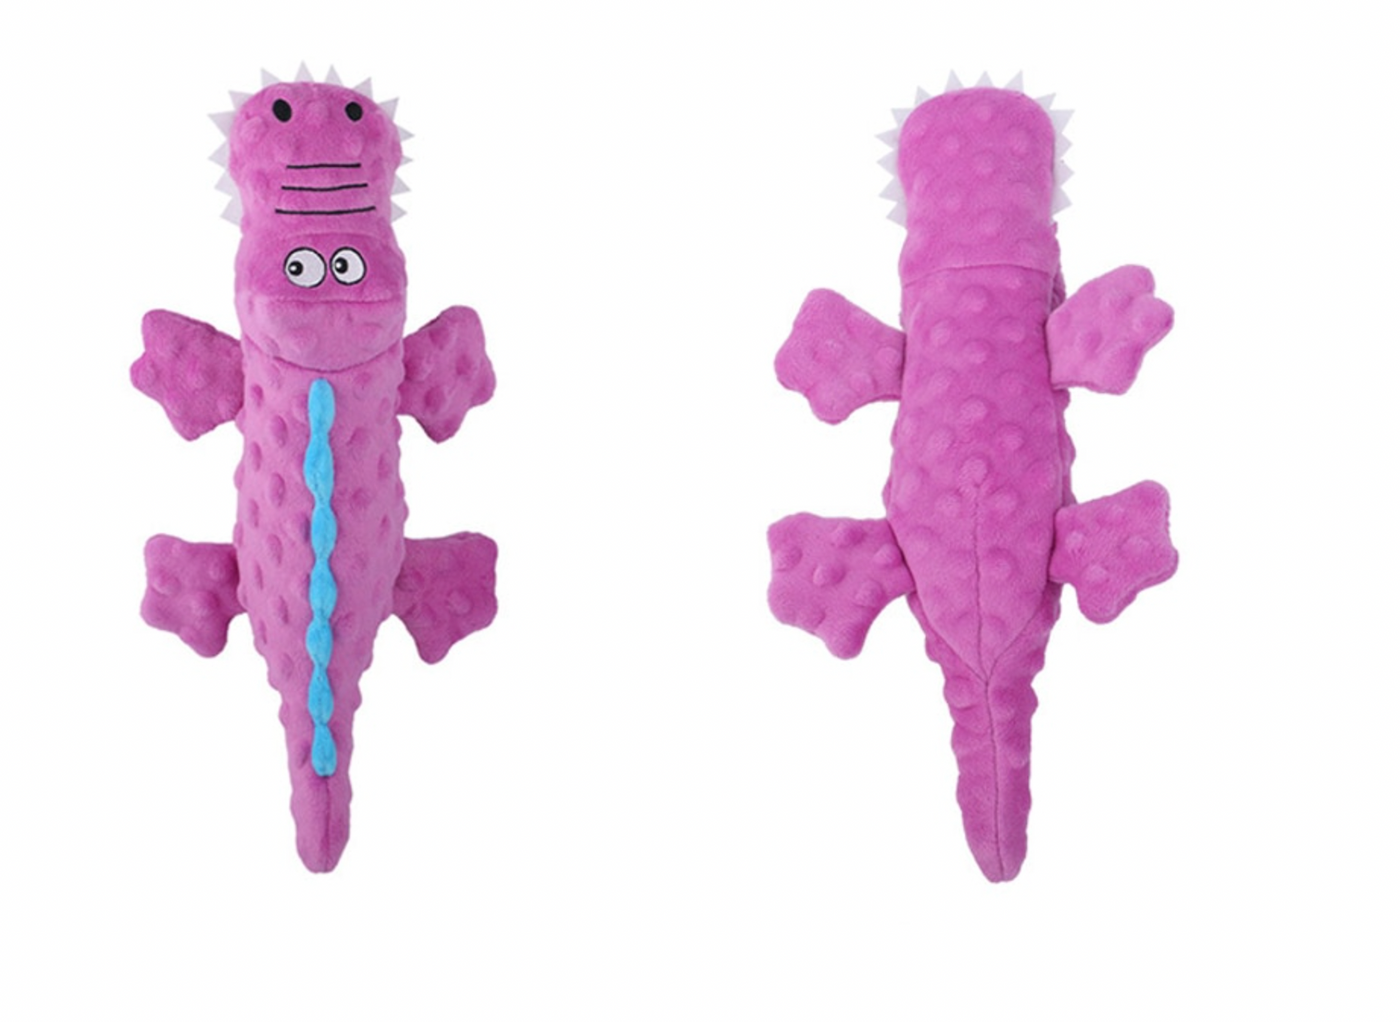 top-down and bottom-up view of pink crocodile-shaped dog toy